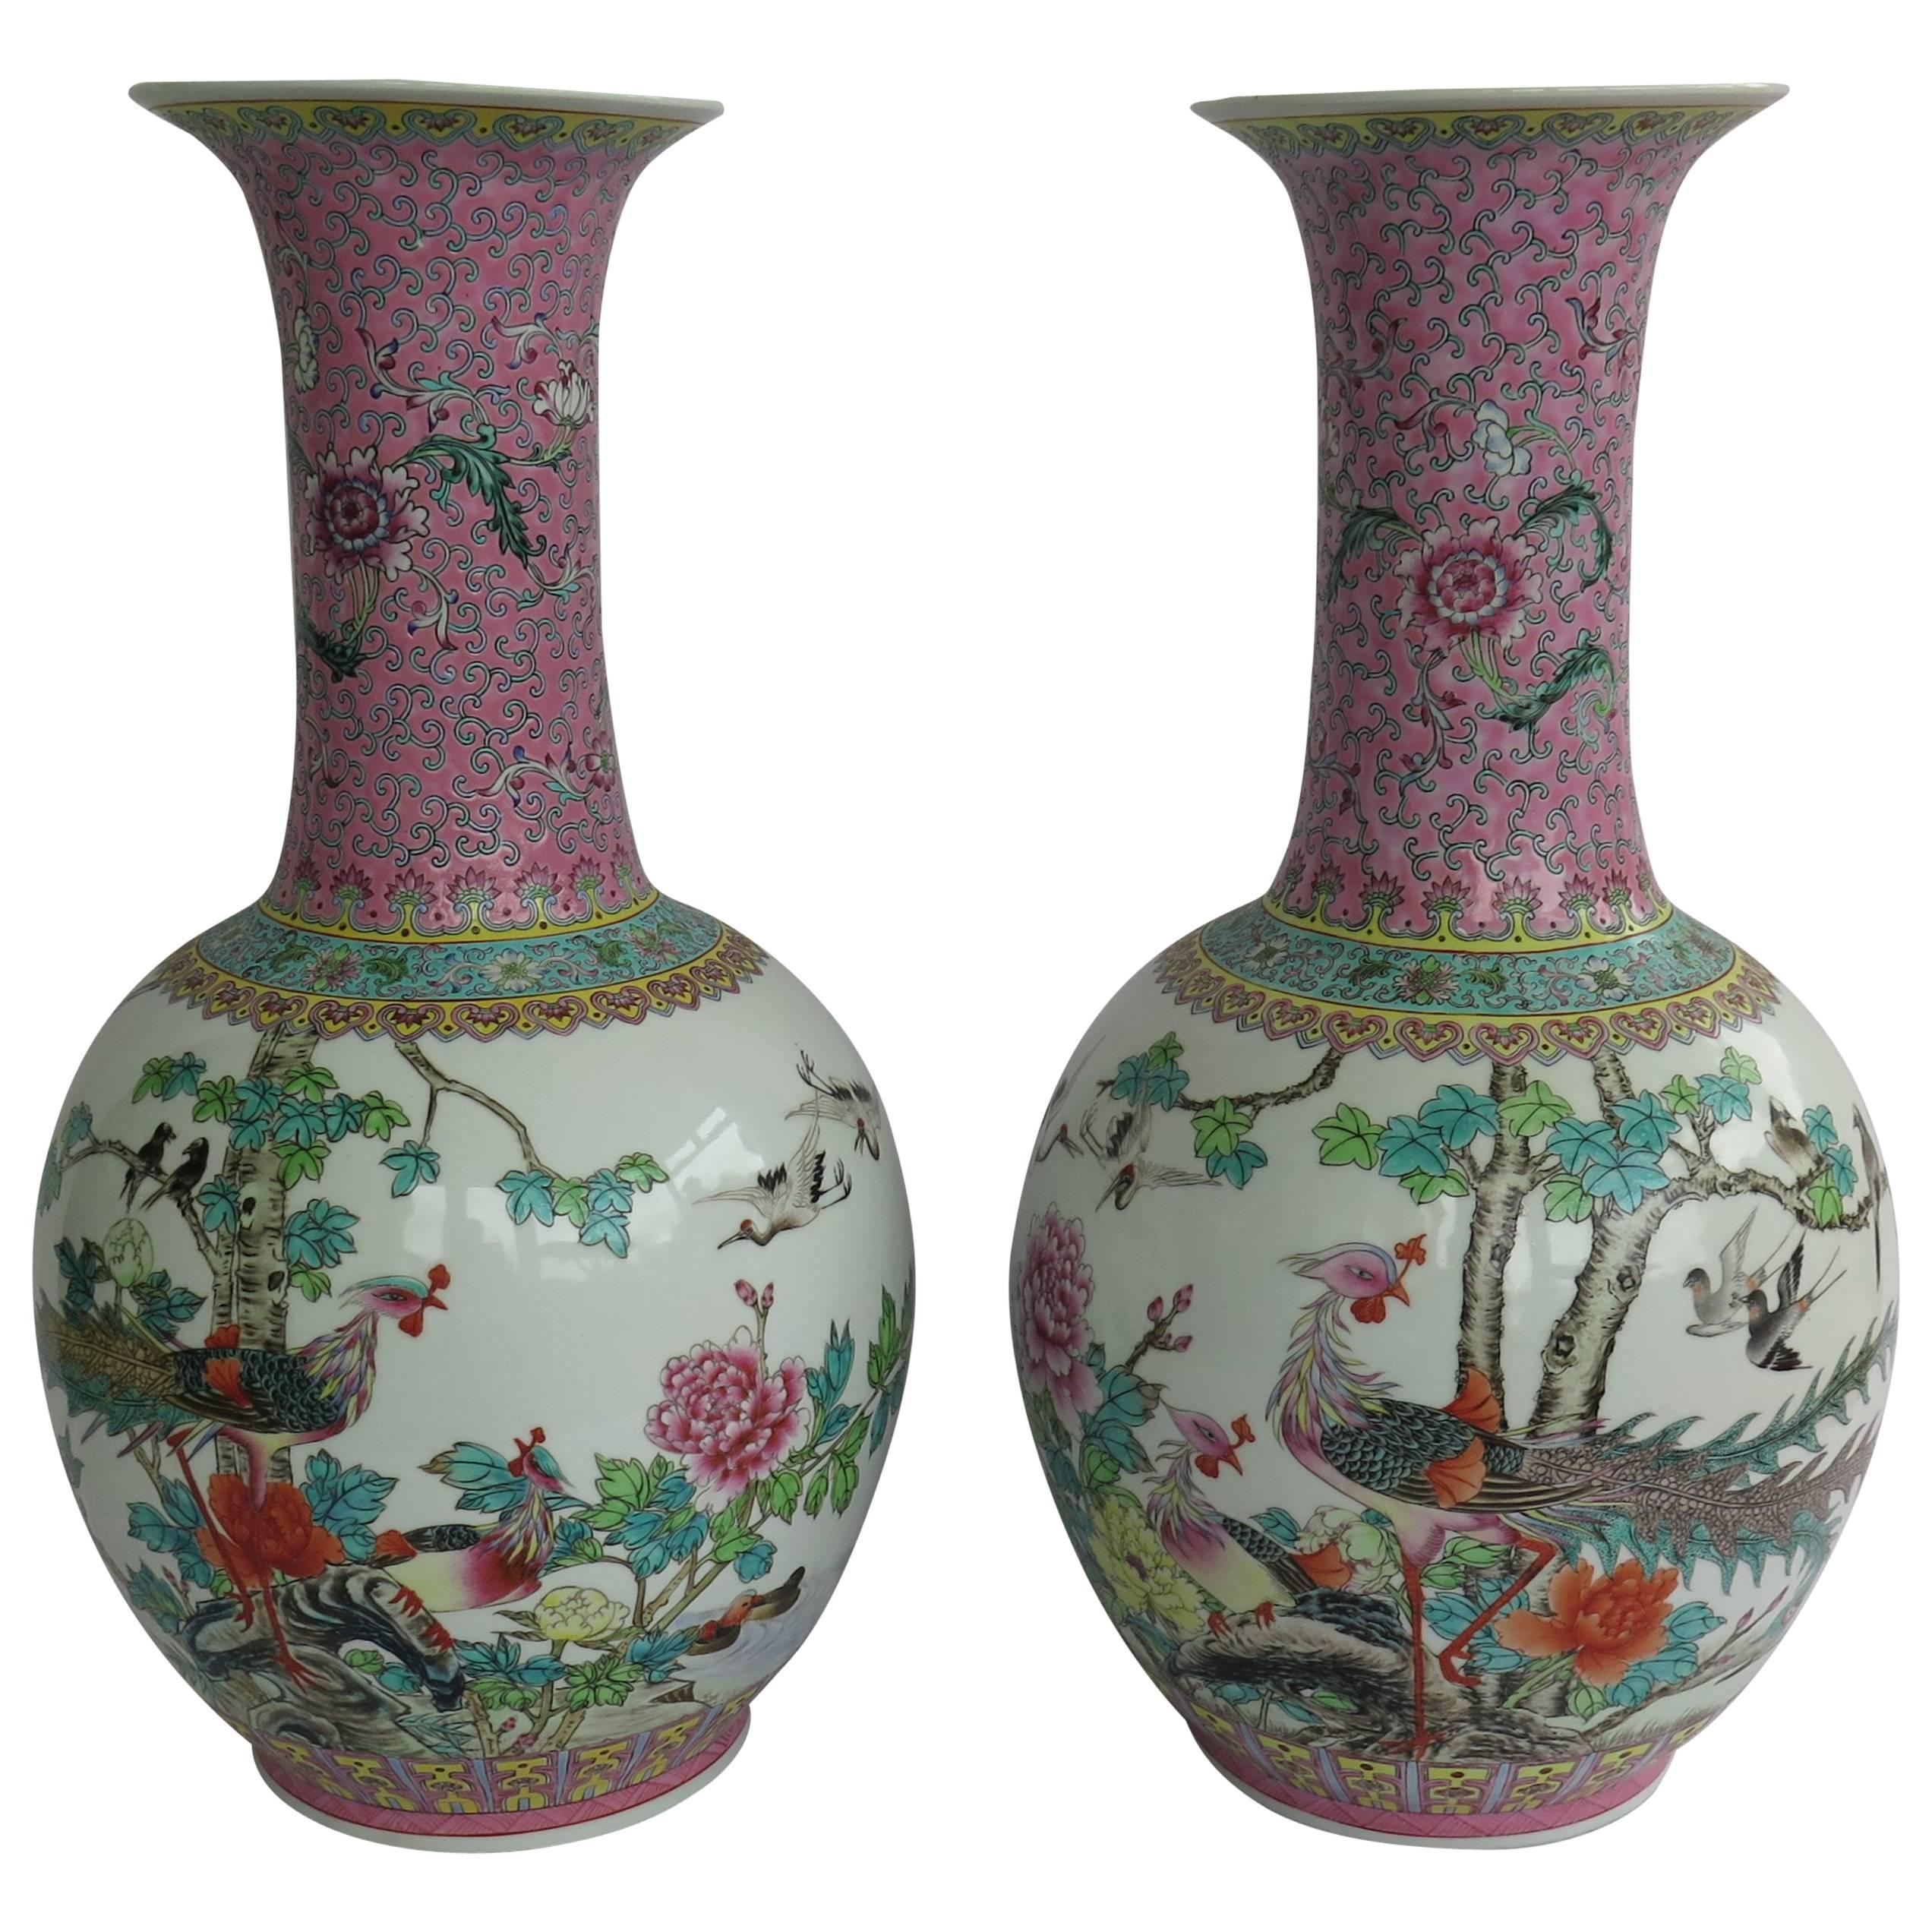  PAIR Large Chinese Porcelain Vases Famille Rose Hand Painted, Mid-20th Century